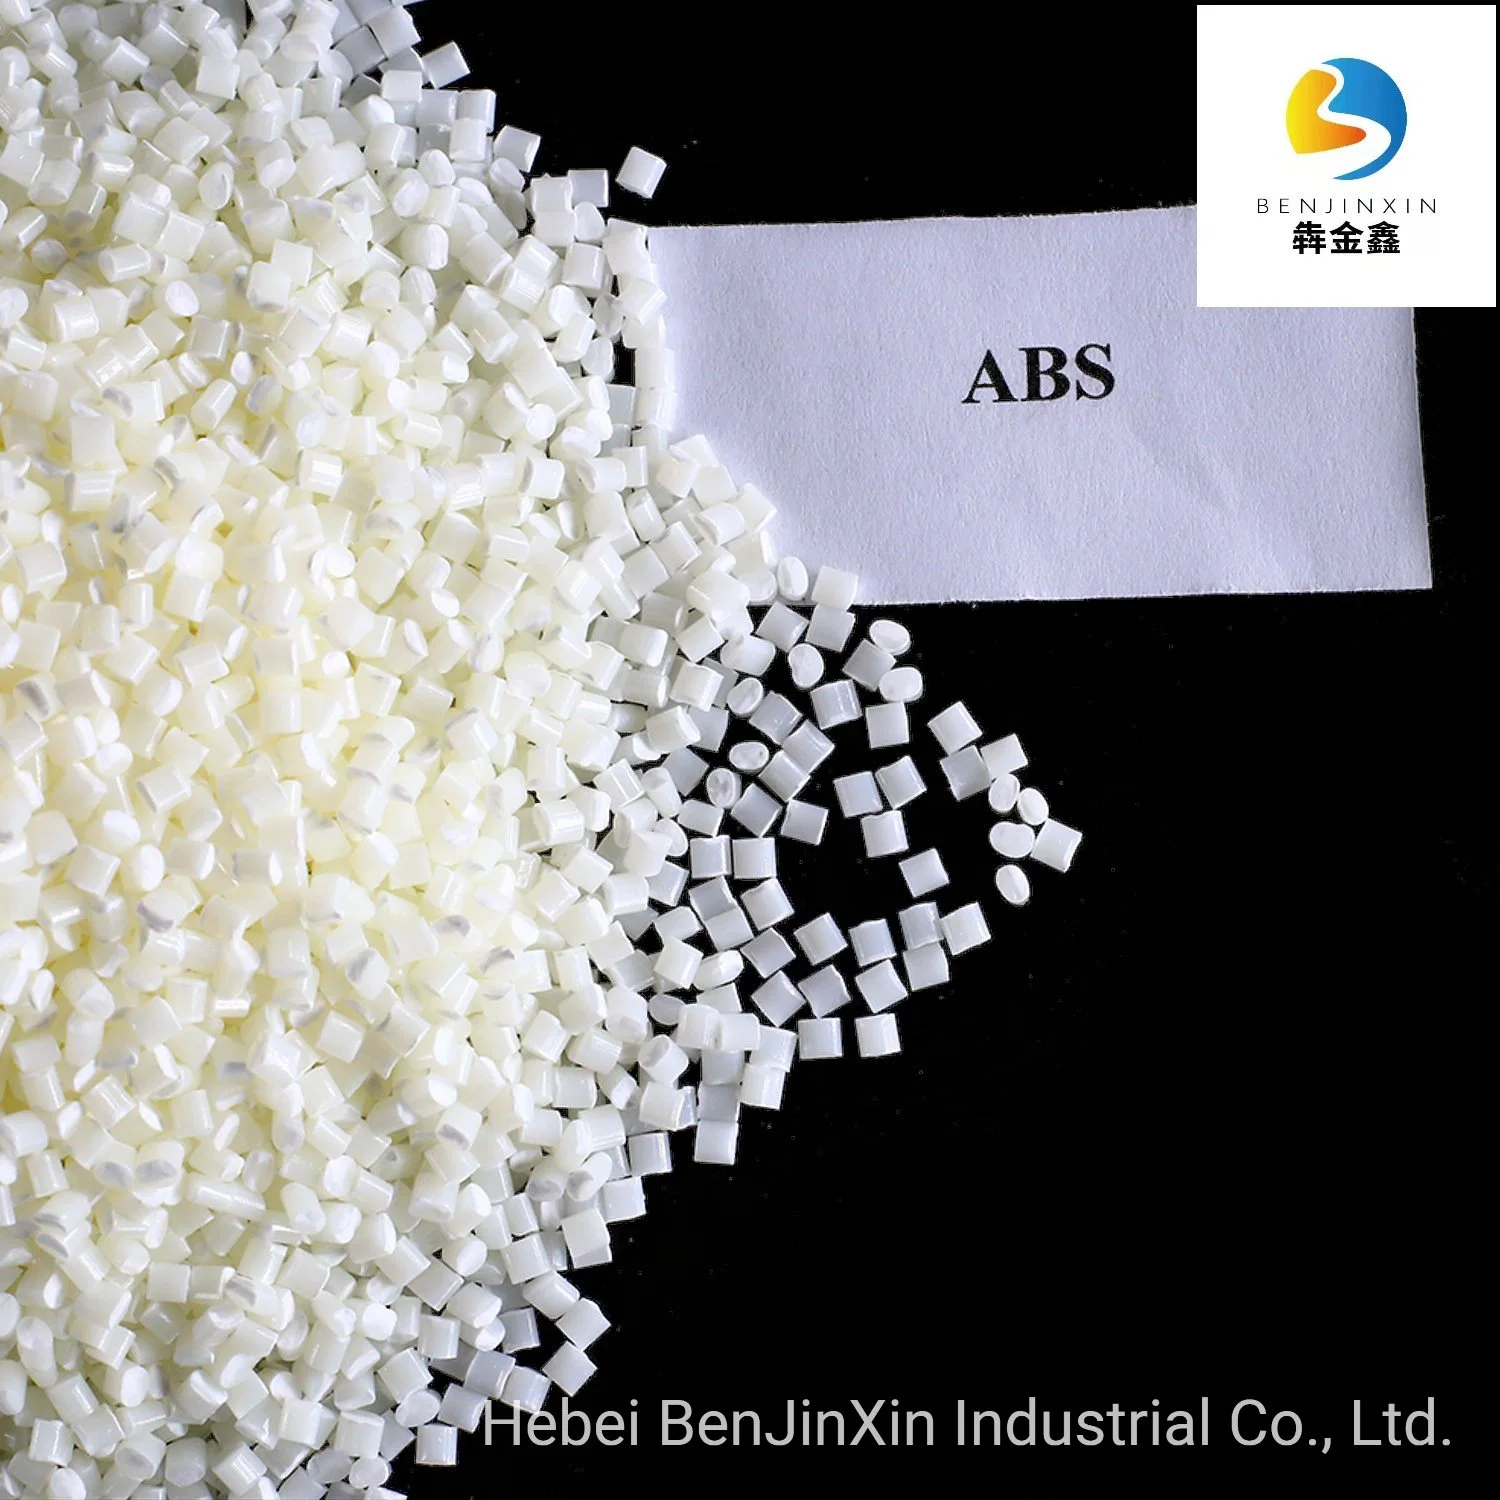 Injection Grade ABS Plastic Resin Raw Material Black Color ABS Resin Granules